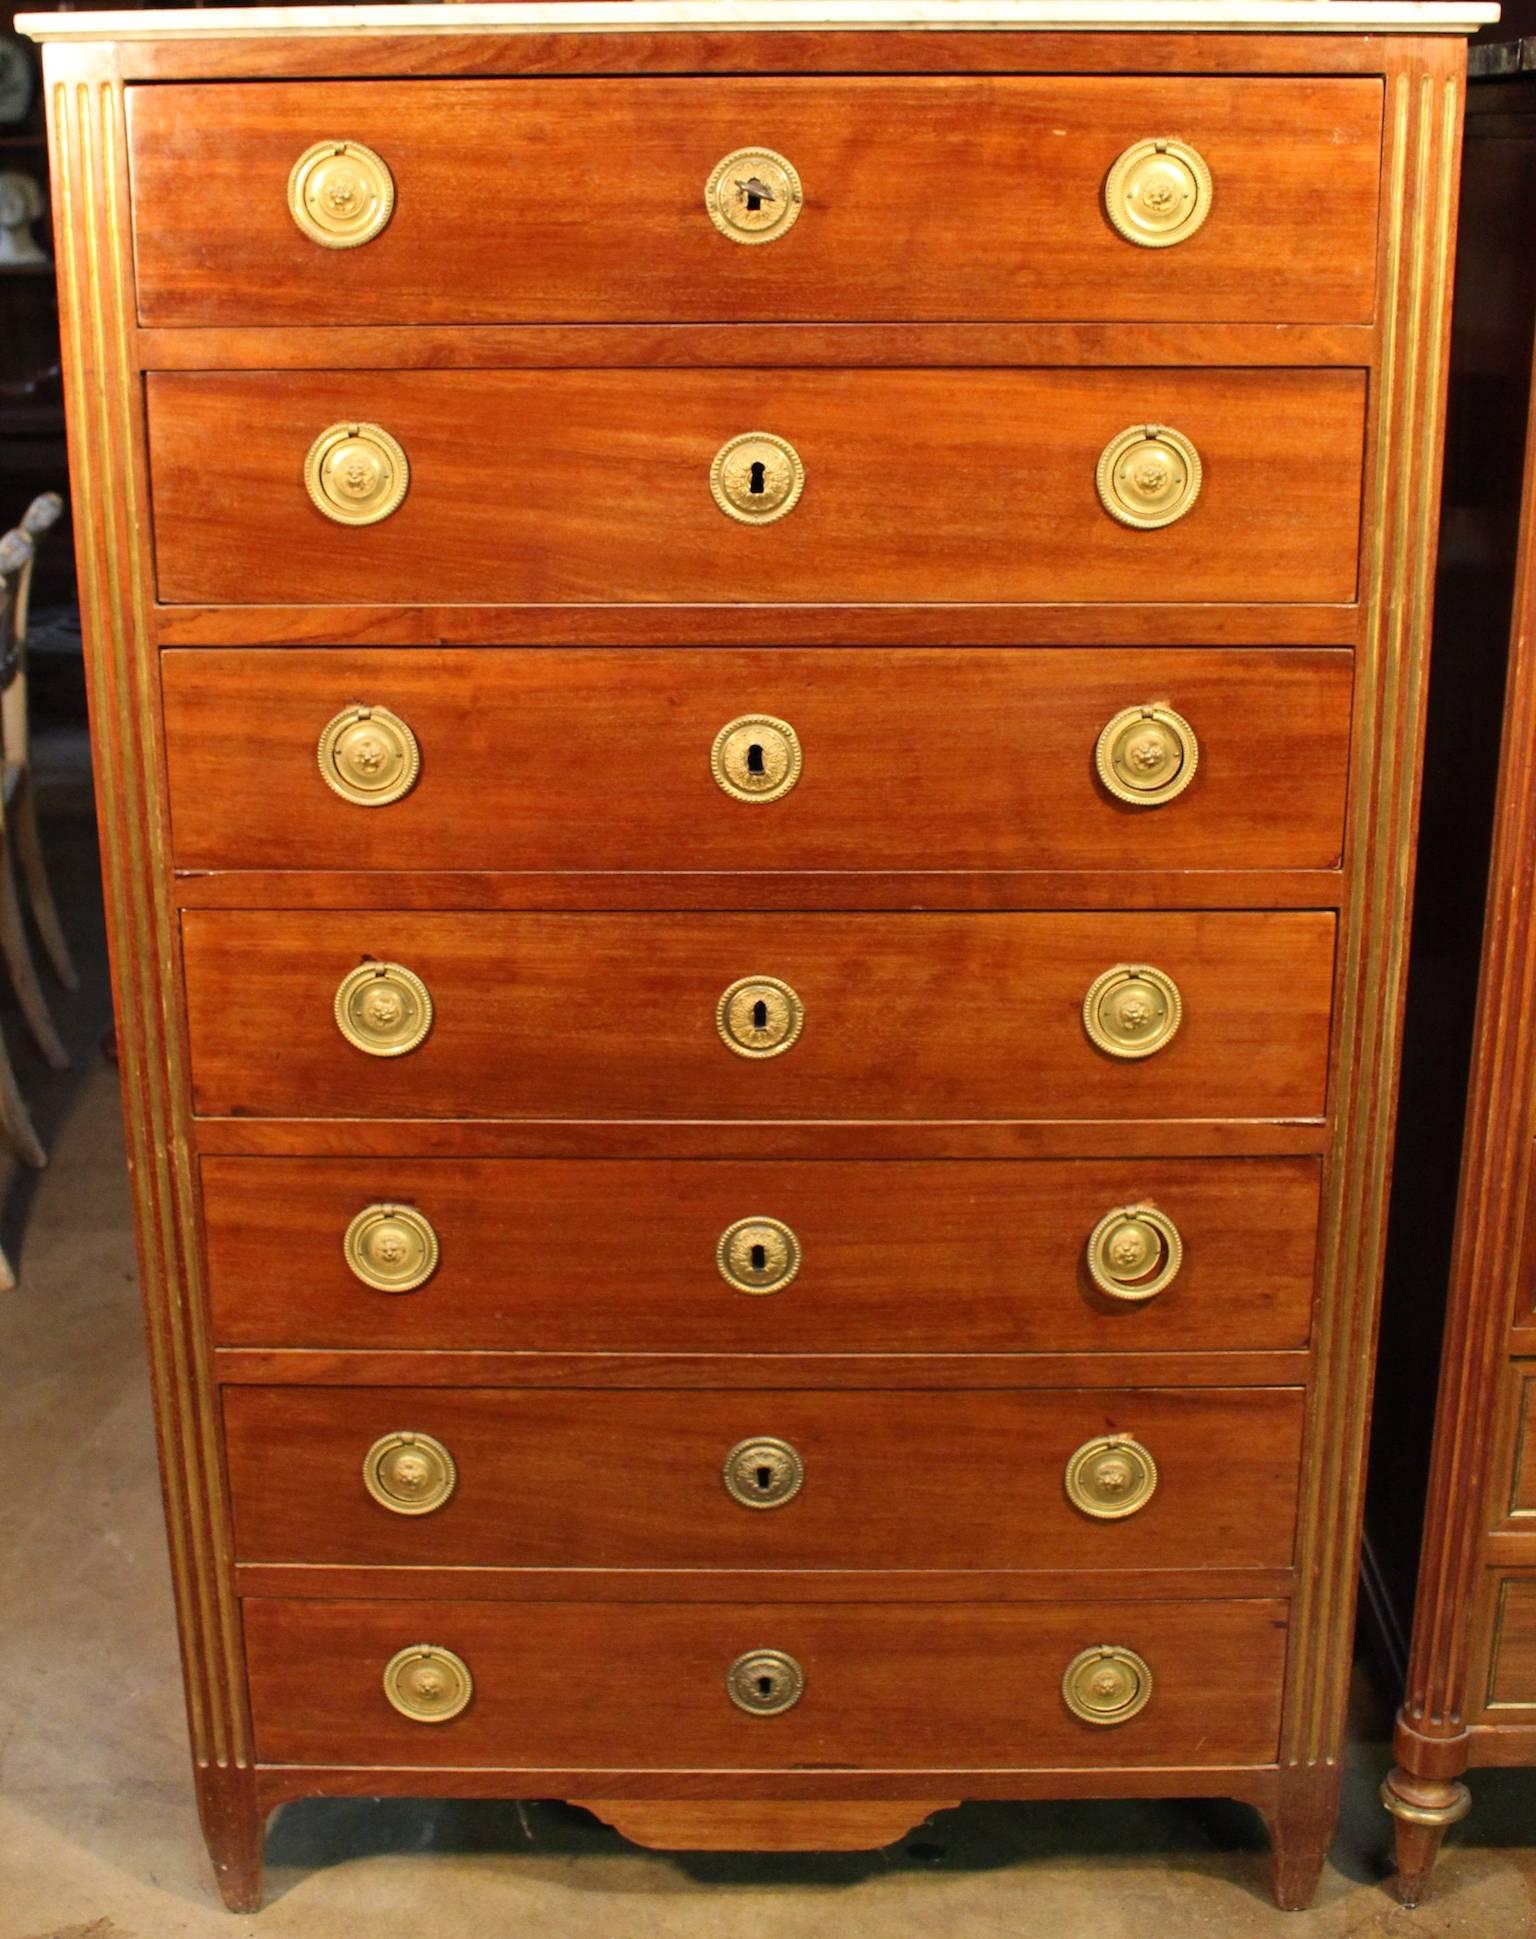 A Swiss Louis XVI style mahogany semainier with marble top and bronze hardware.